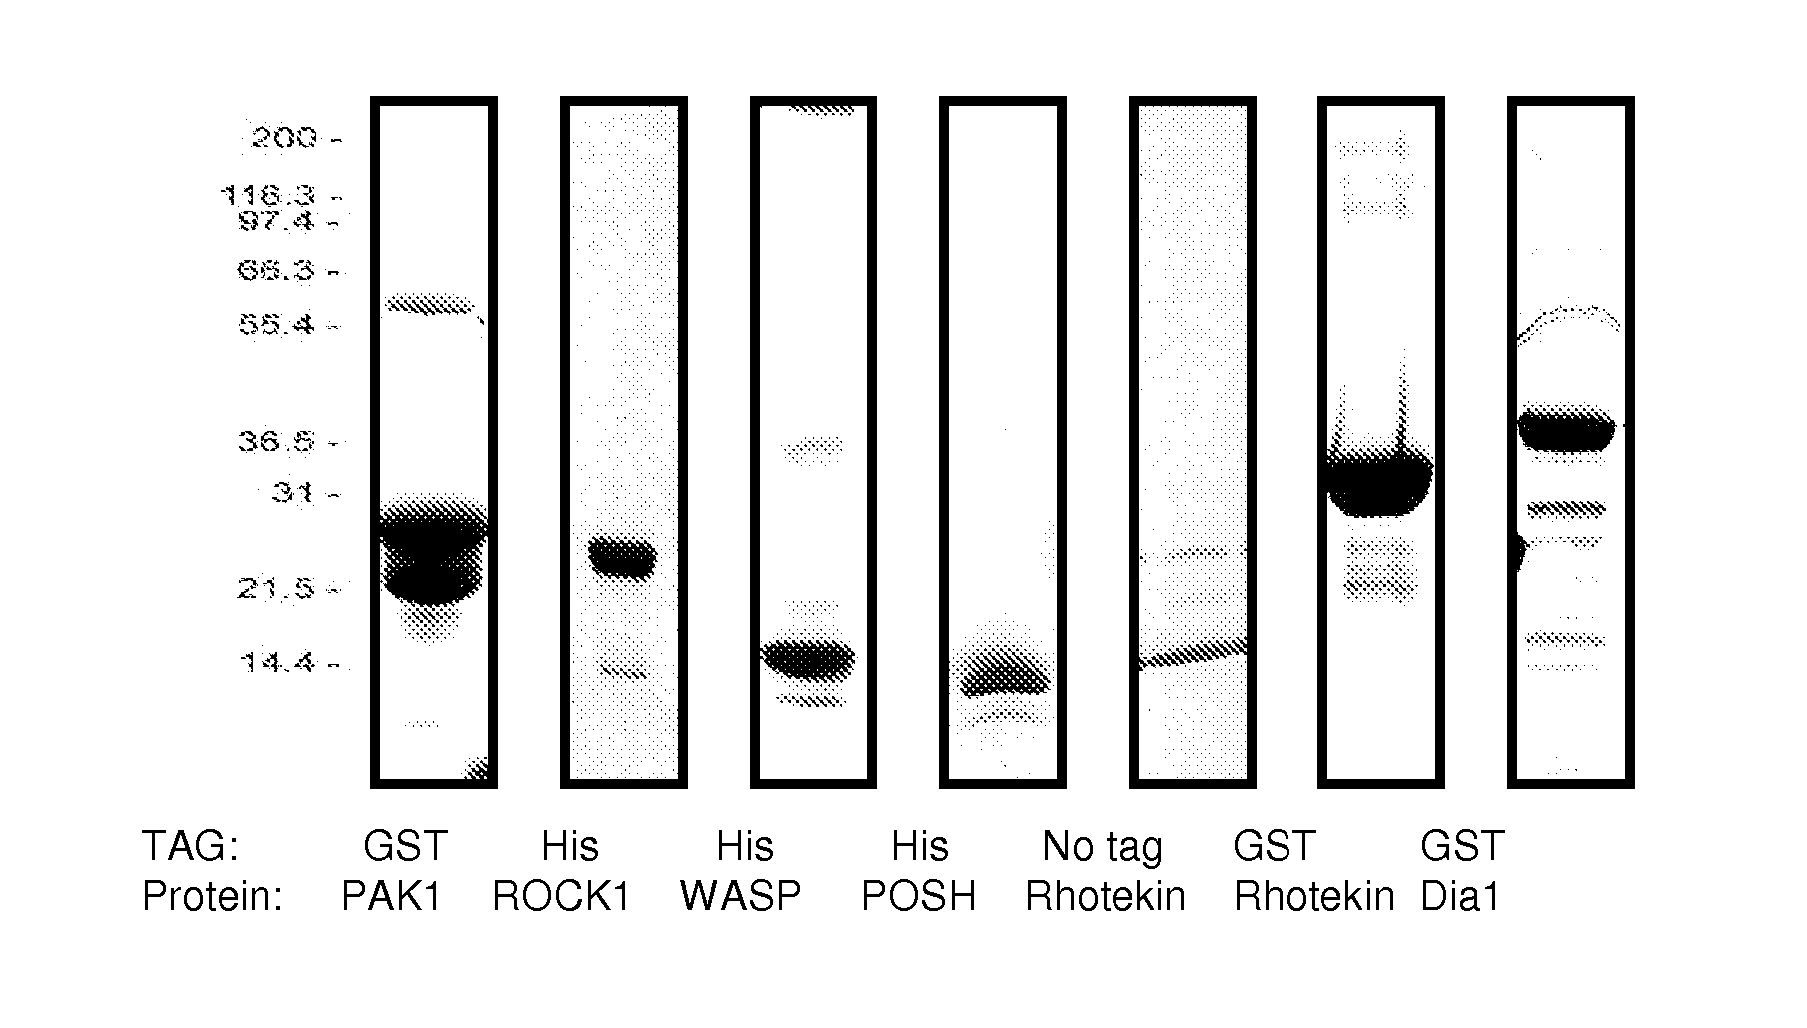 Detection of rho proteins